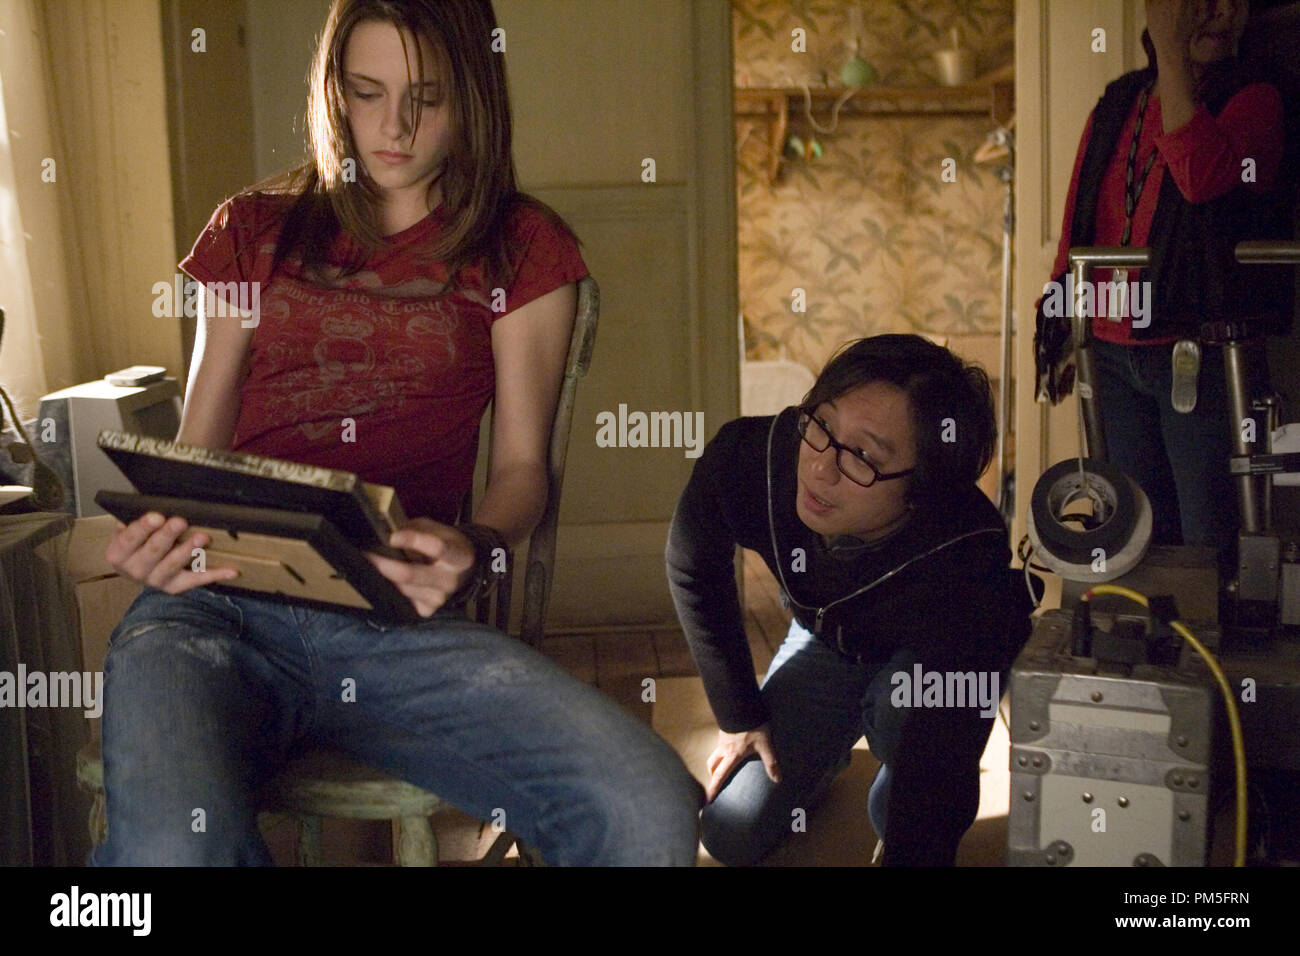 Studio Publicity Still from 'The Messengers' Kristen Stewart, Director Oxide Pang Chun © 2007 Screen Gems Photo credit: Takashi Seida    File Reference # 307381717THA  For Editorial Use Only -  All Rights Reserved Stock Photo